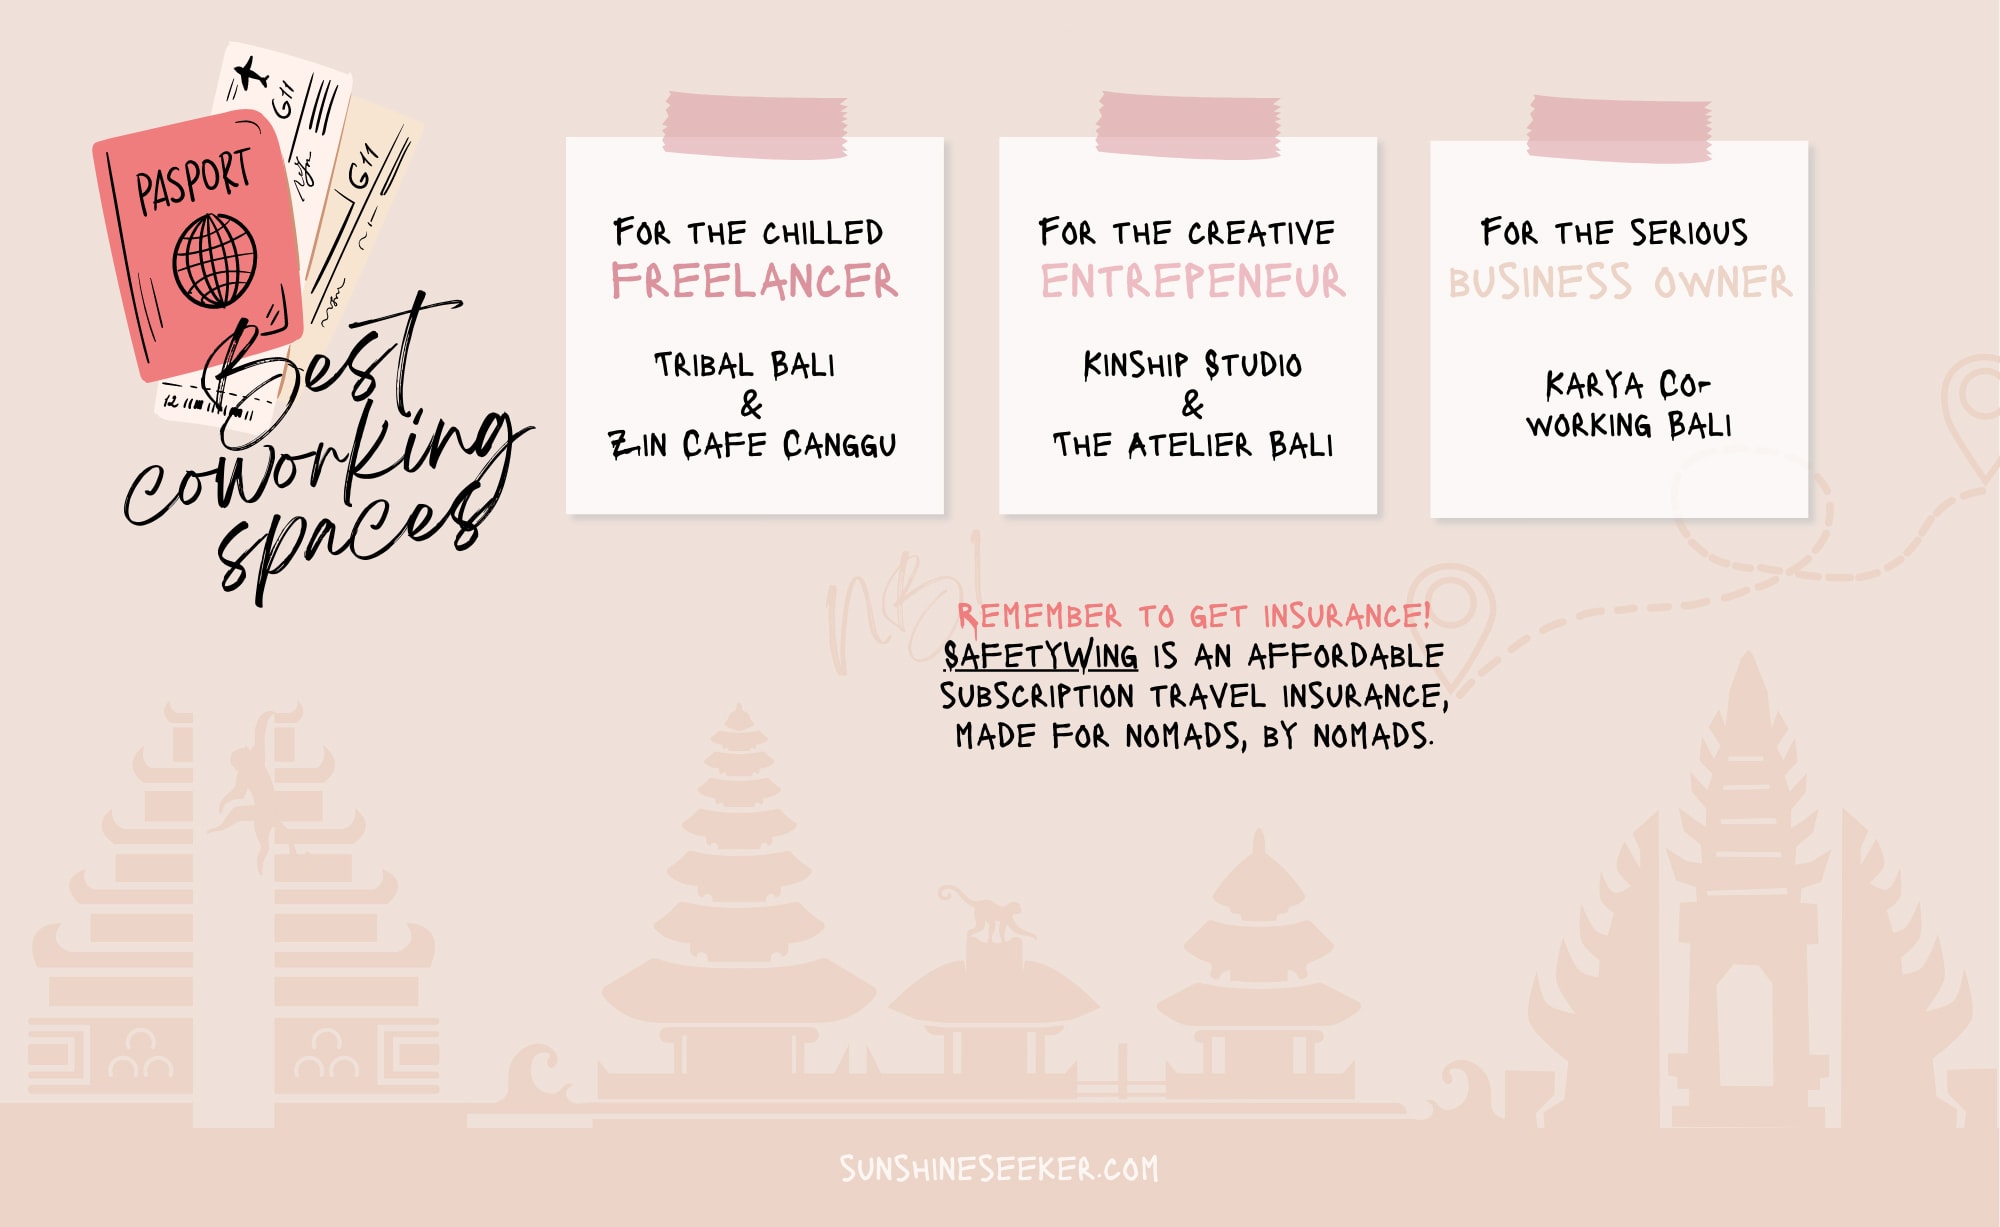 Canggu for digital nomads infographic - Coworking spaces